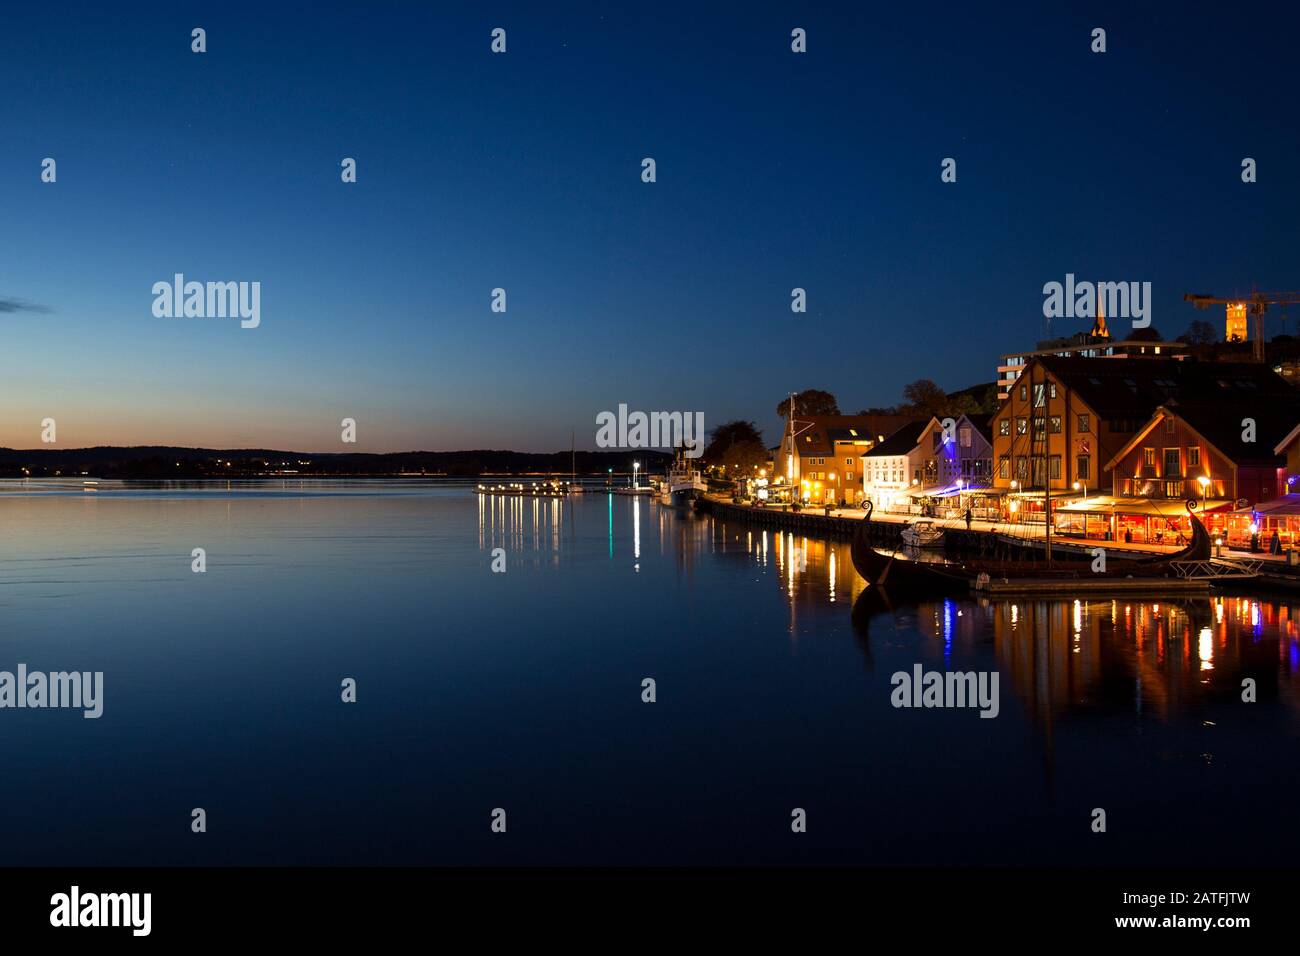 Amazing night shot of city harbour, port with viking ship with restaurants and bars. Sunset with blue sky and sea. Stock Photo